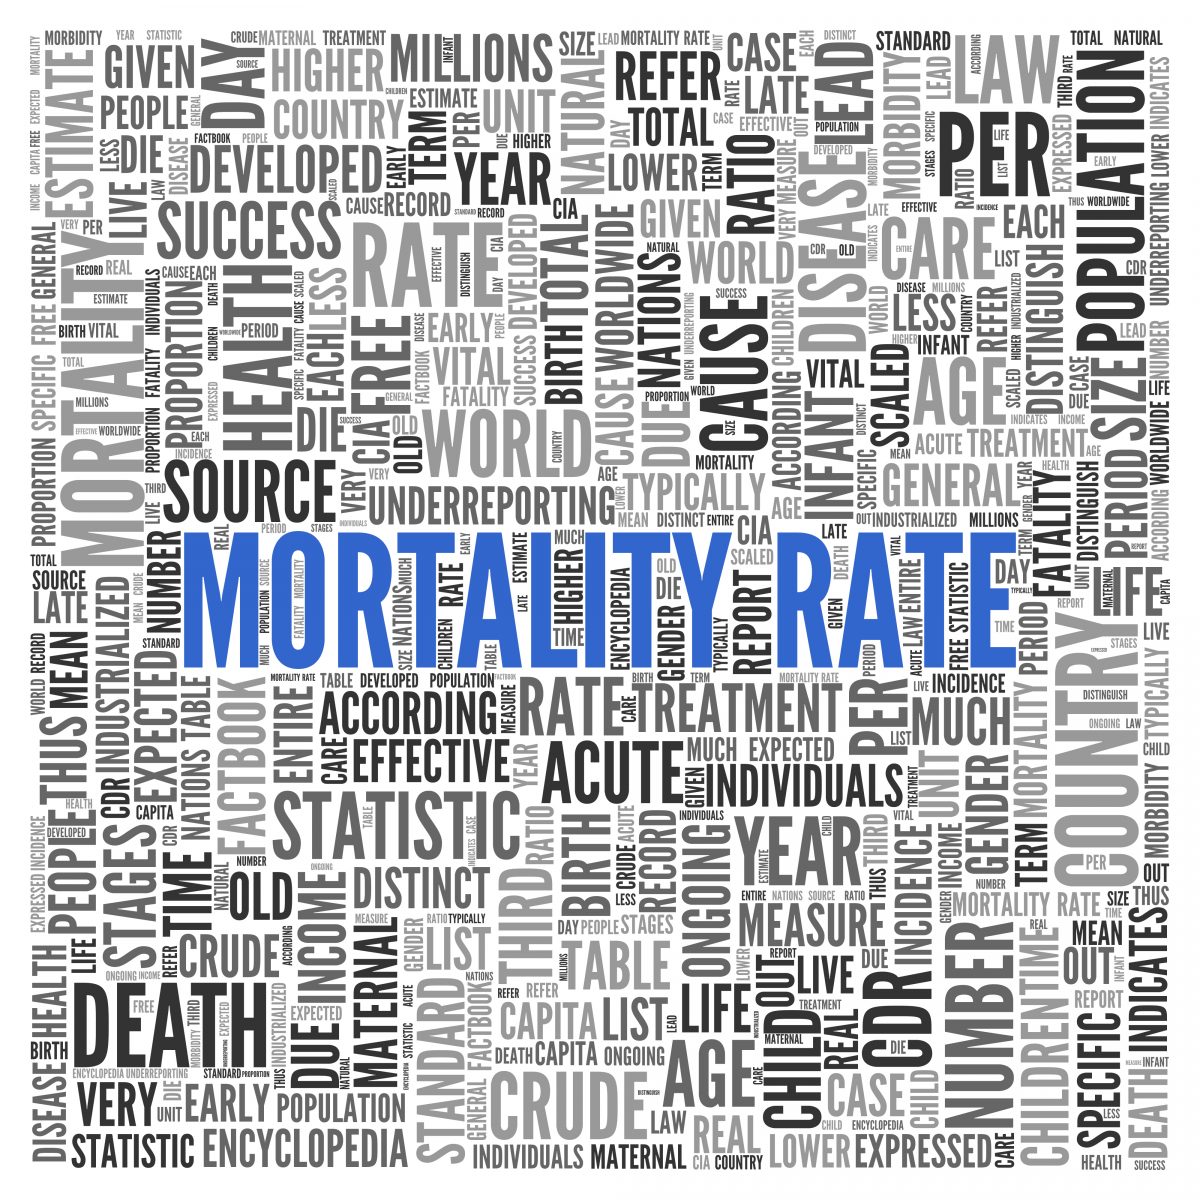 Scleroderma mortality rates